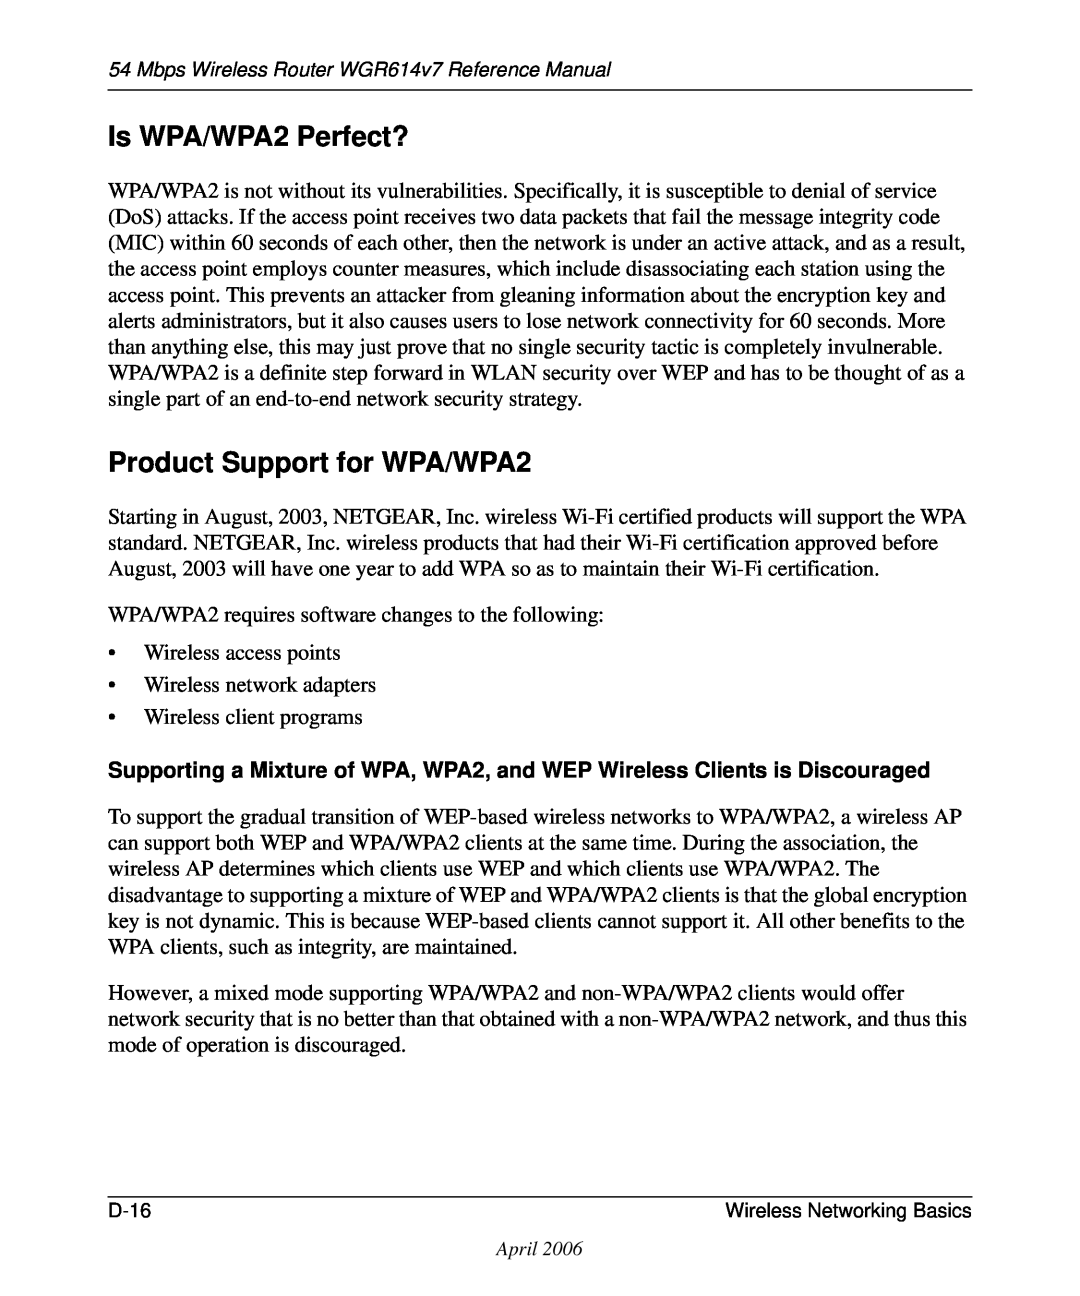 NETGEAR WGR614v7 manual Is WPA/WPA2 Perfect?, Product Support for WPA/WPA2 